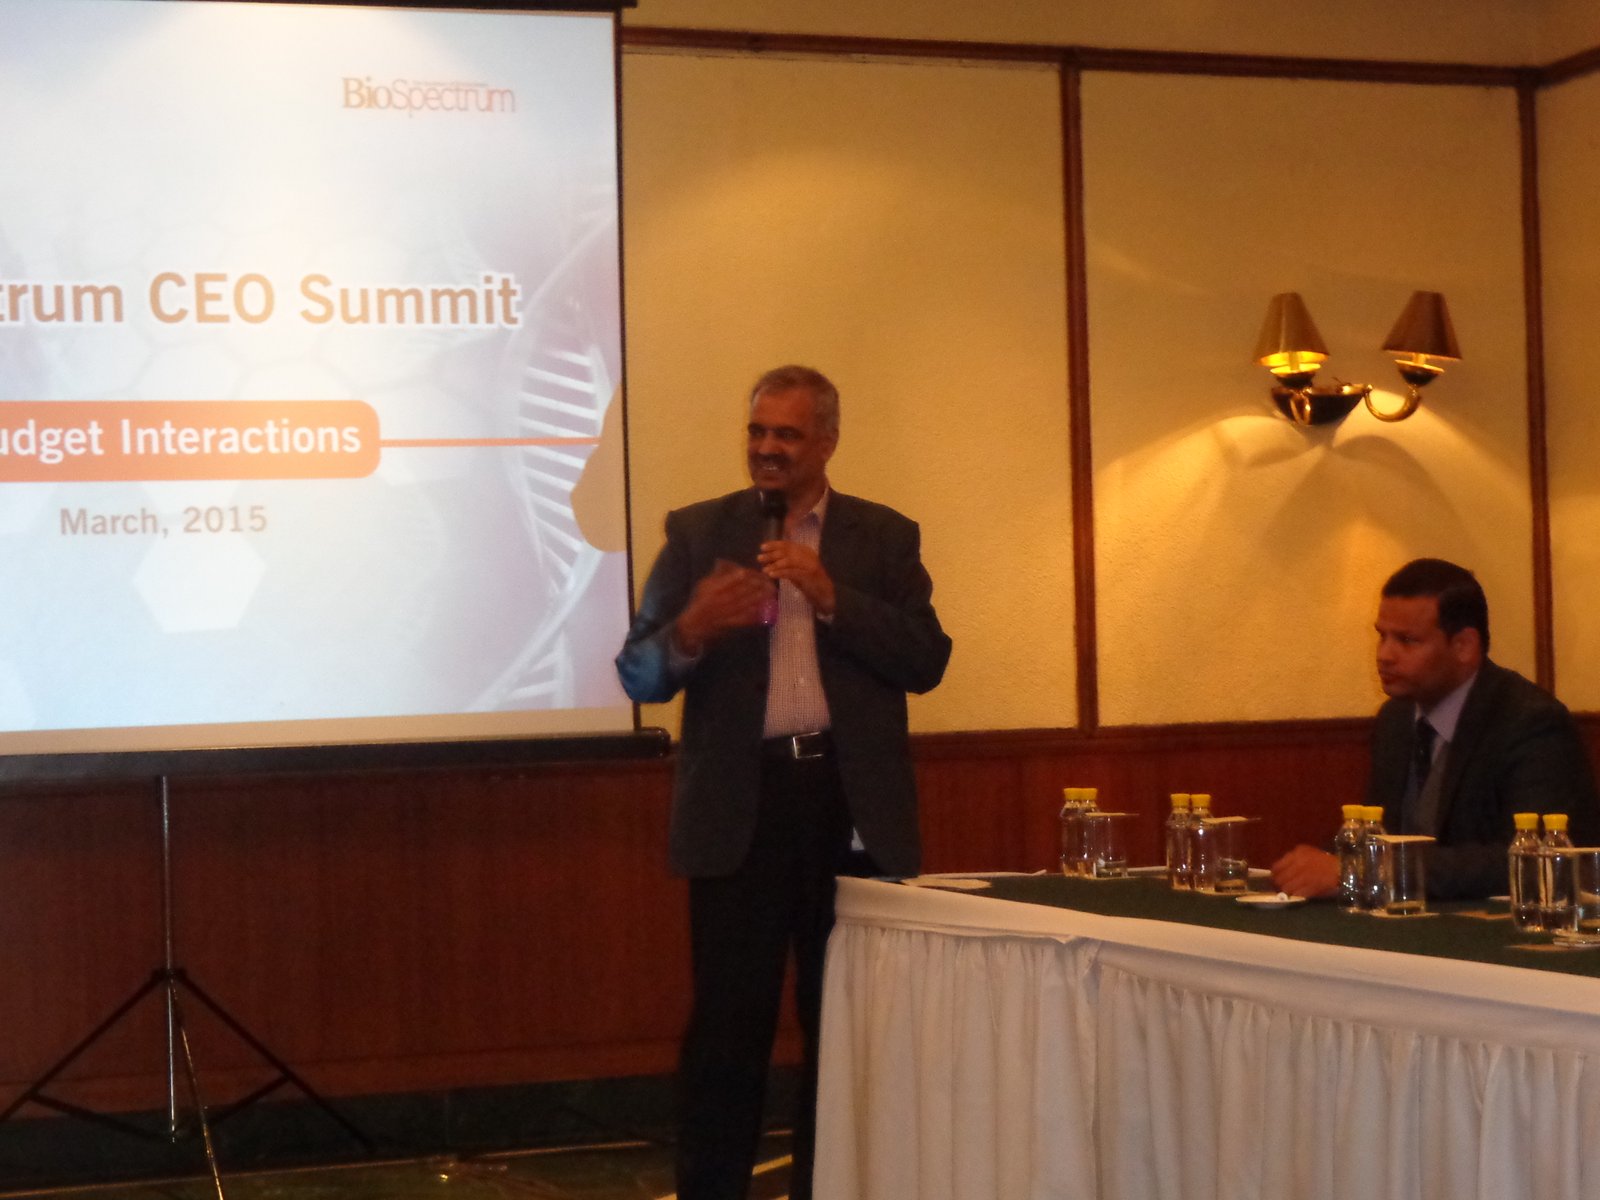 BioSpectrum's Editor in Chief, Mr N Suresh moderating the discussions between various representatives at the round table summit.